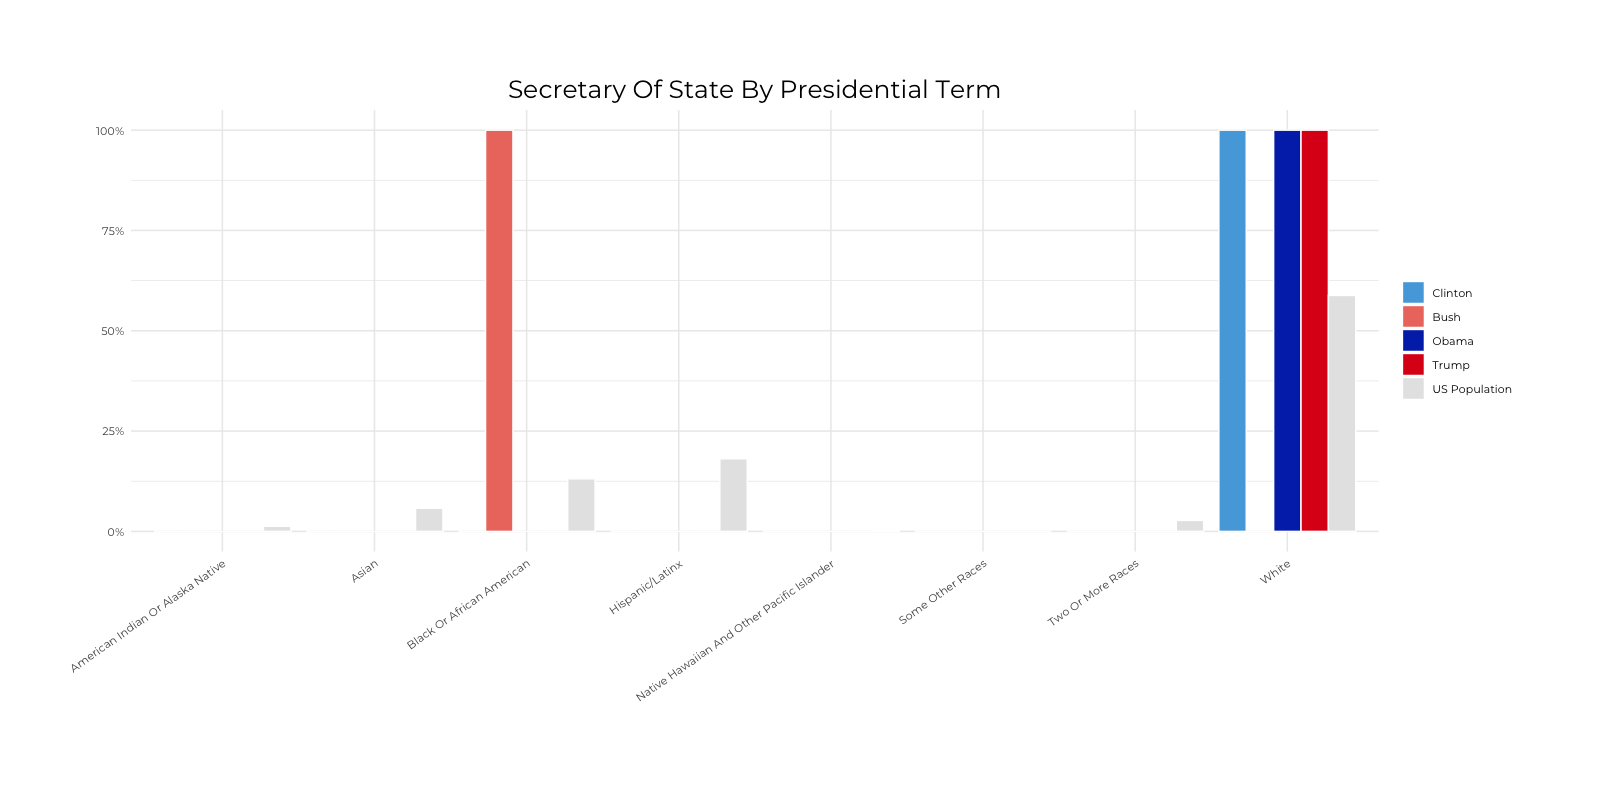 Graph about Racial Composition Comparison of Secretary of State by Presidential Terms. More detailed text description below.